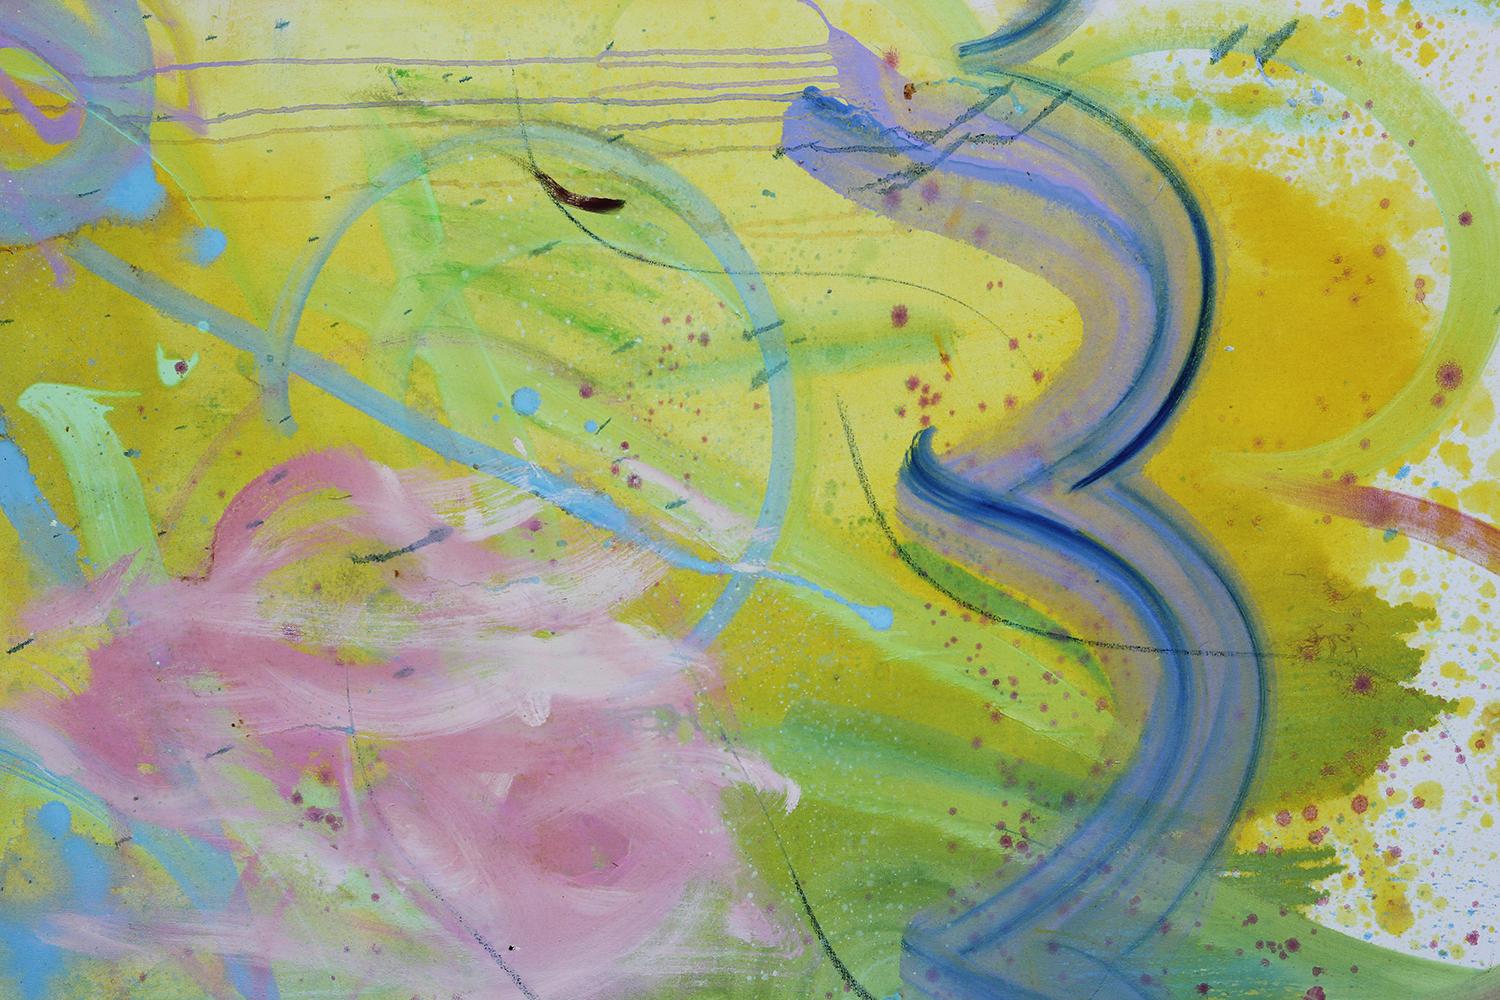 Large Bright Yellow, Green, Purple, and Pink Gestural Abstract Painting 2